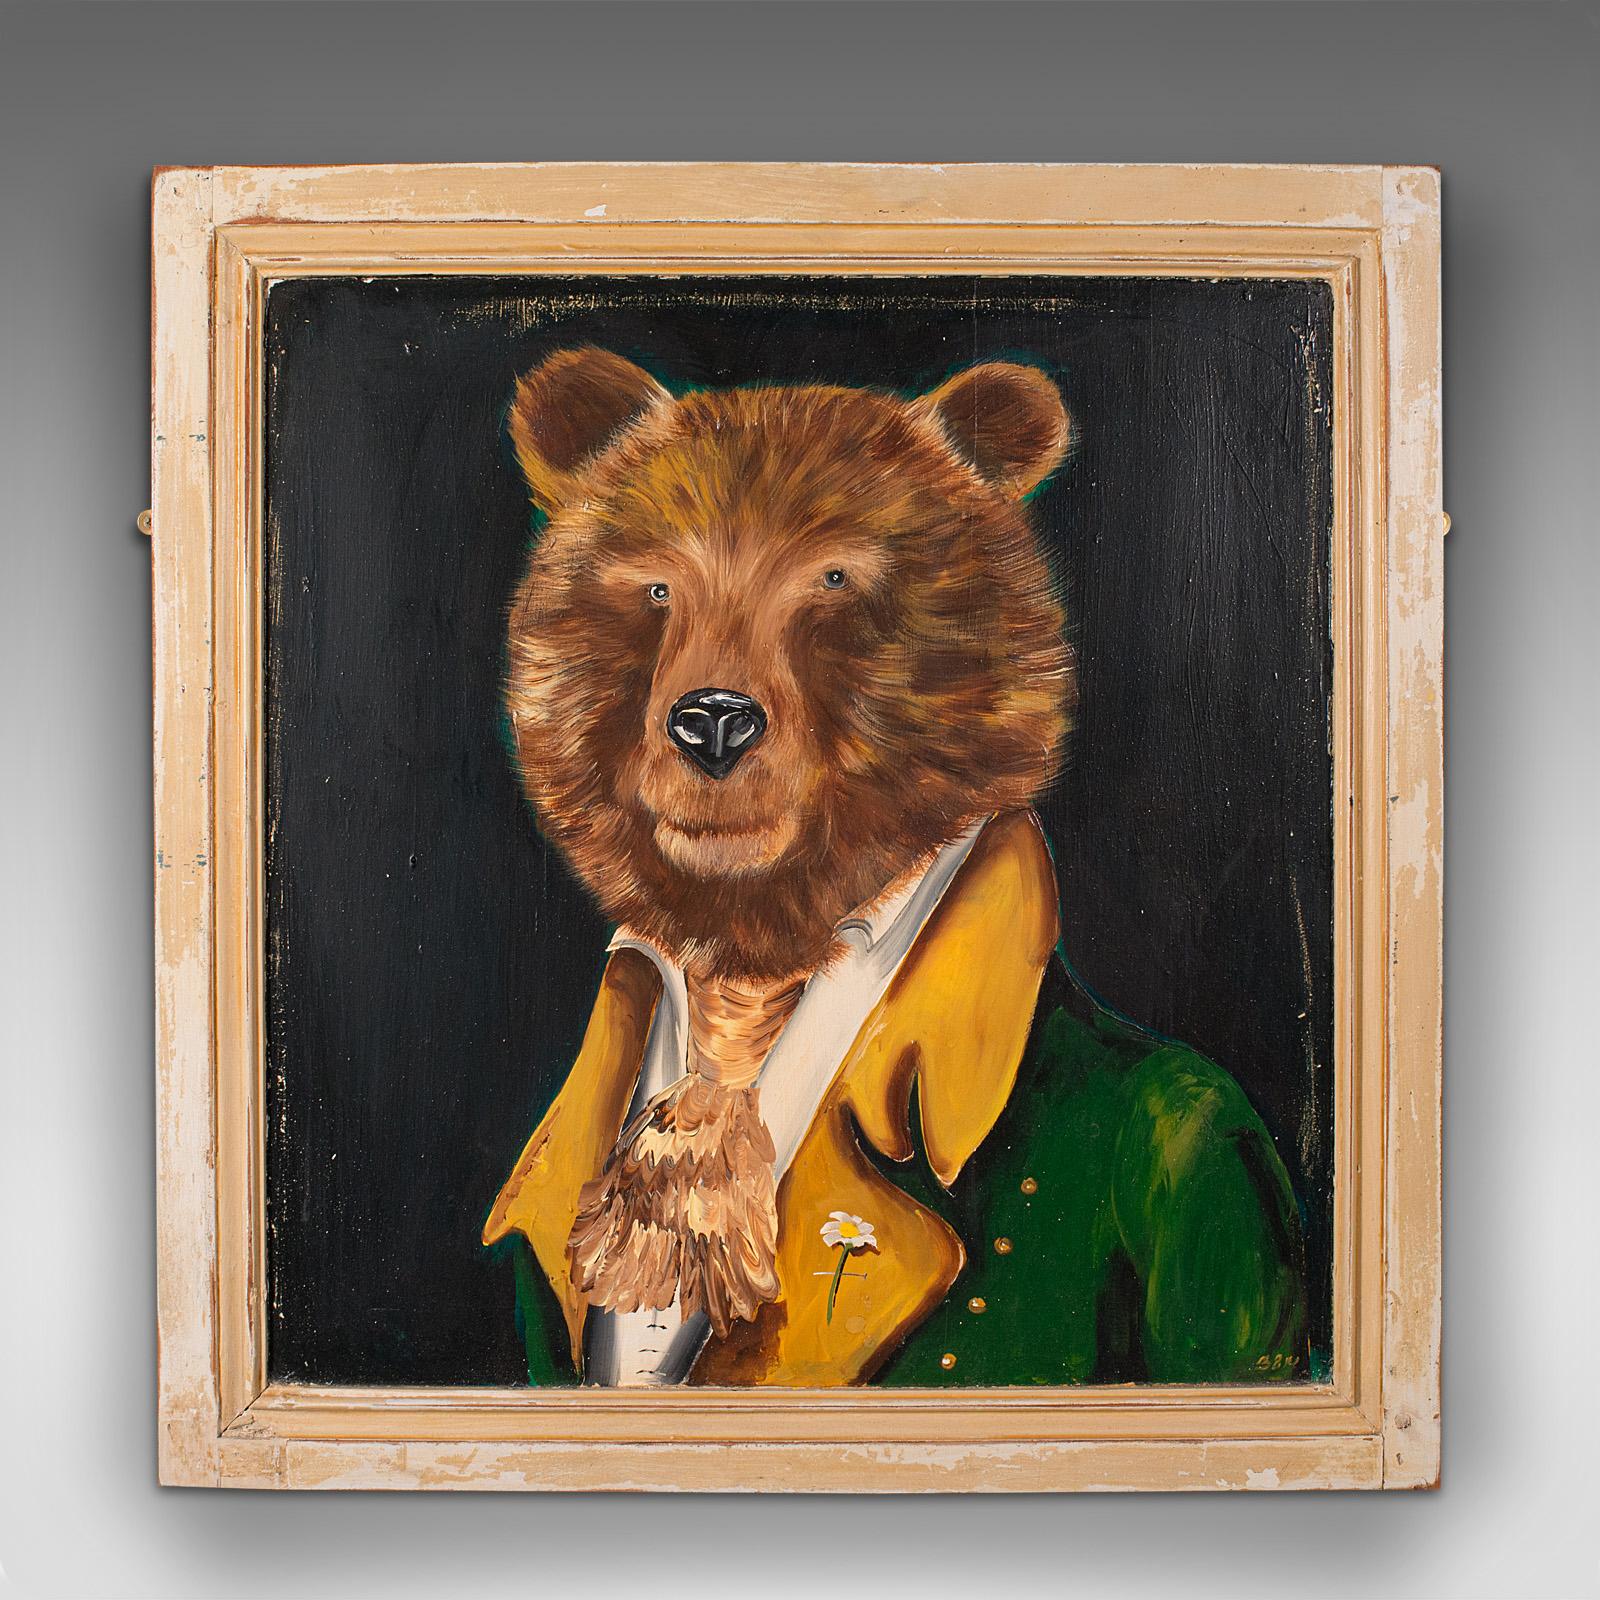 This is a vintage brown bear portrait. An English, oil painting on reclaimed Victorian pine, dating to the late 20th century, circa 1970.

Jovial and intriguing, ideal for collectors of anthropomorphism
Displaying a desirable aged patina